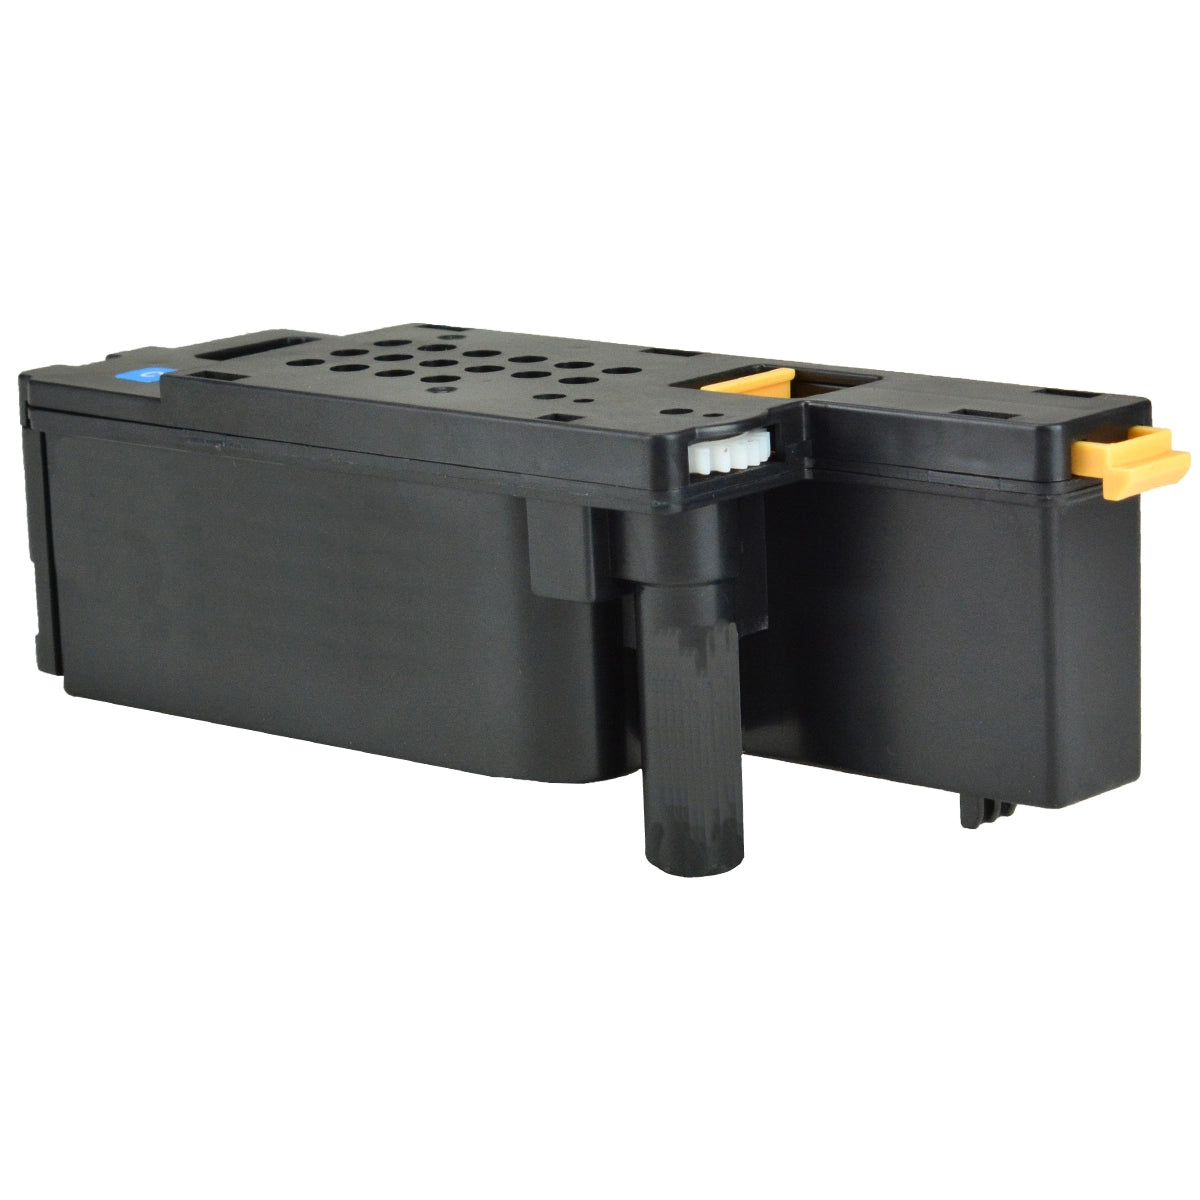 Xerox Phaser 6020/6022 / Workcentre 6025/6027 (106R02756) Cyan Standard Capacity Compatible Toner Cartridge